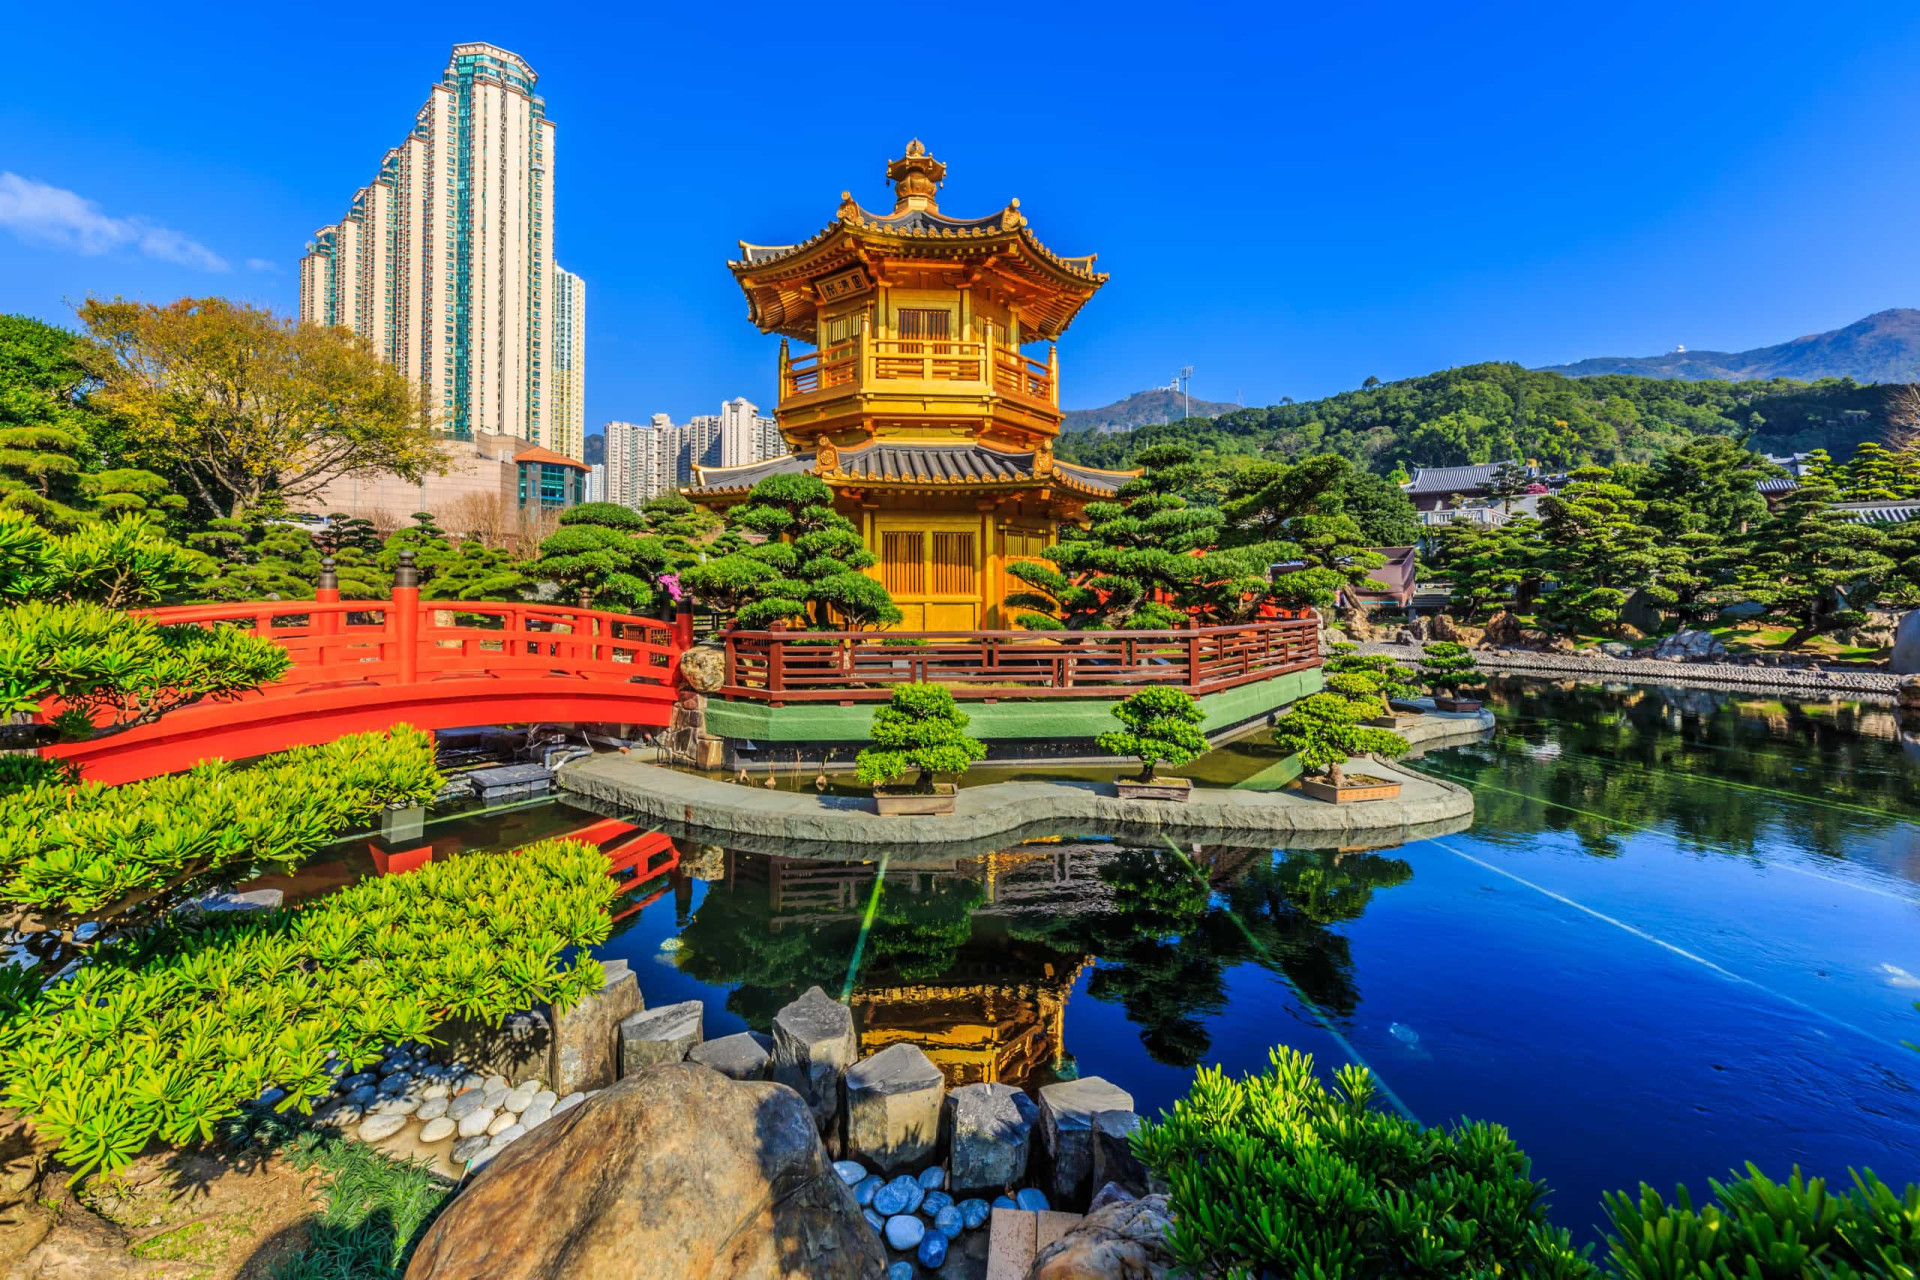 The most beautiful city parks in the world